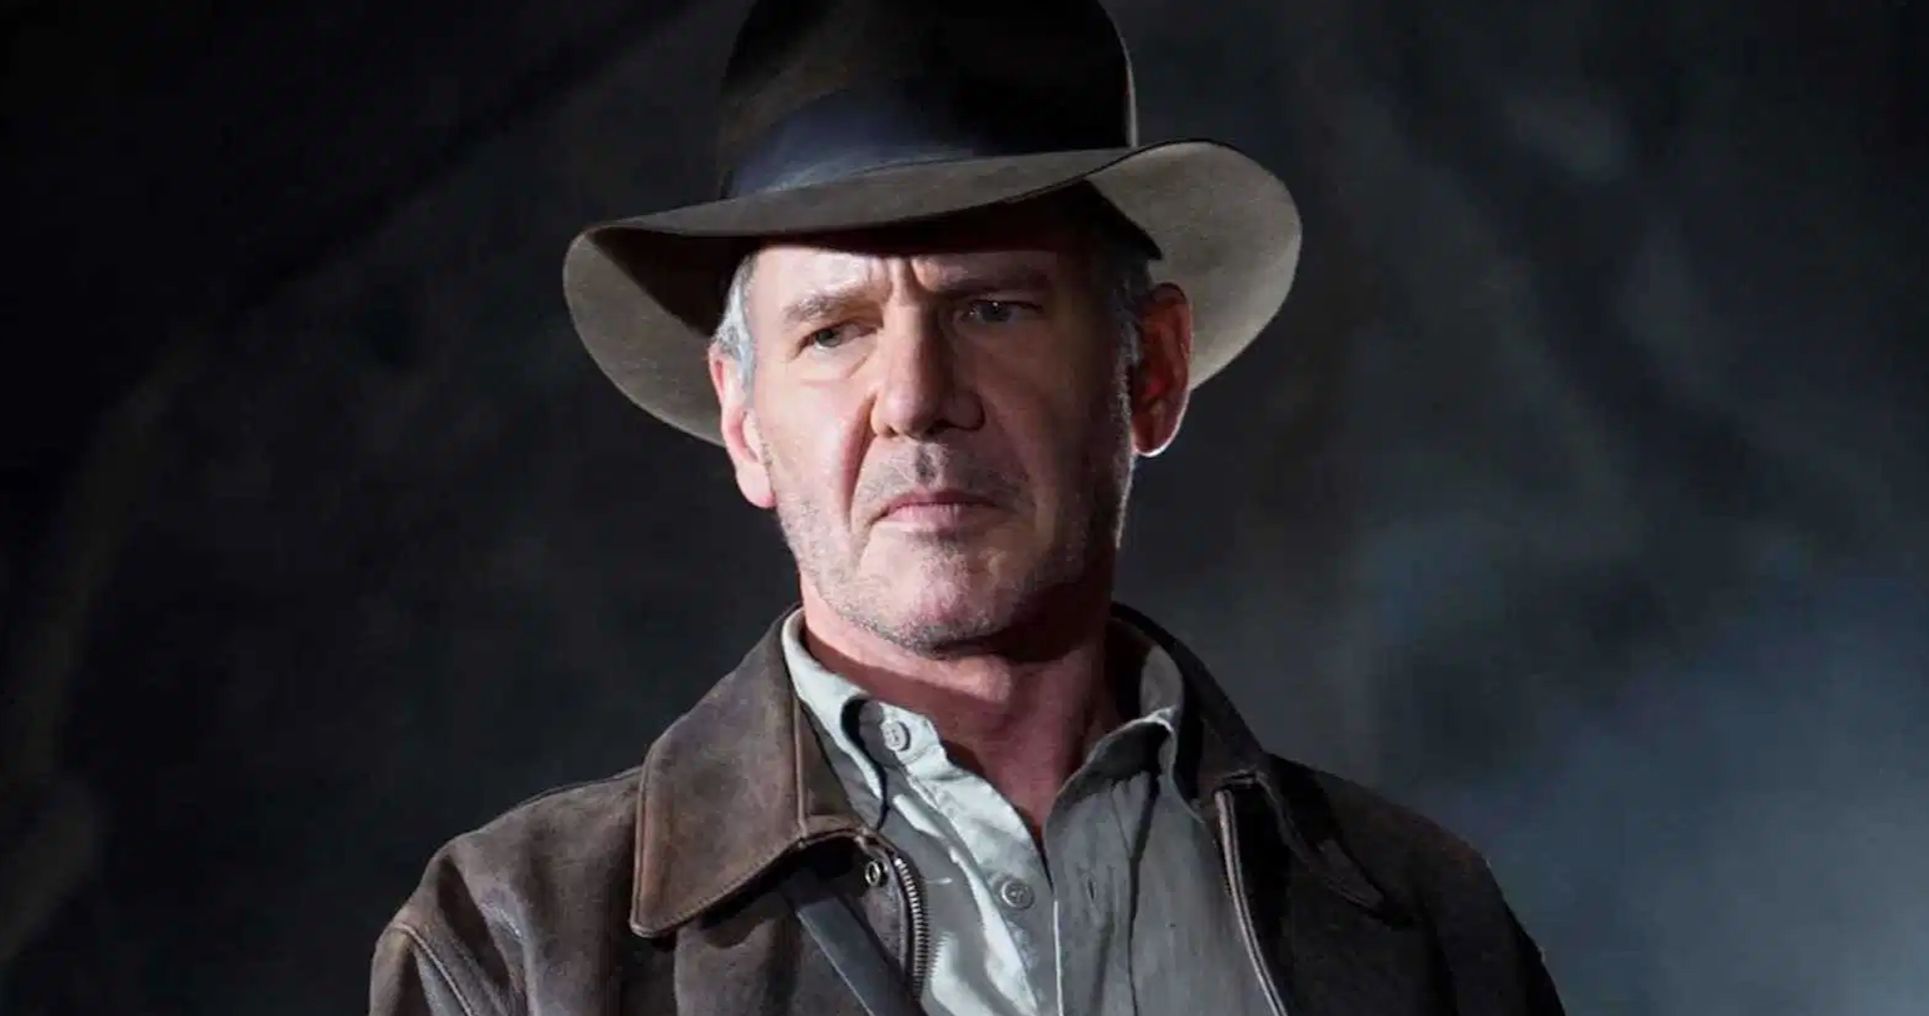 Indiana Jones 5 Timeline and Setting Teased by Director James Mangold